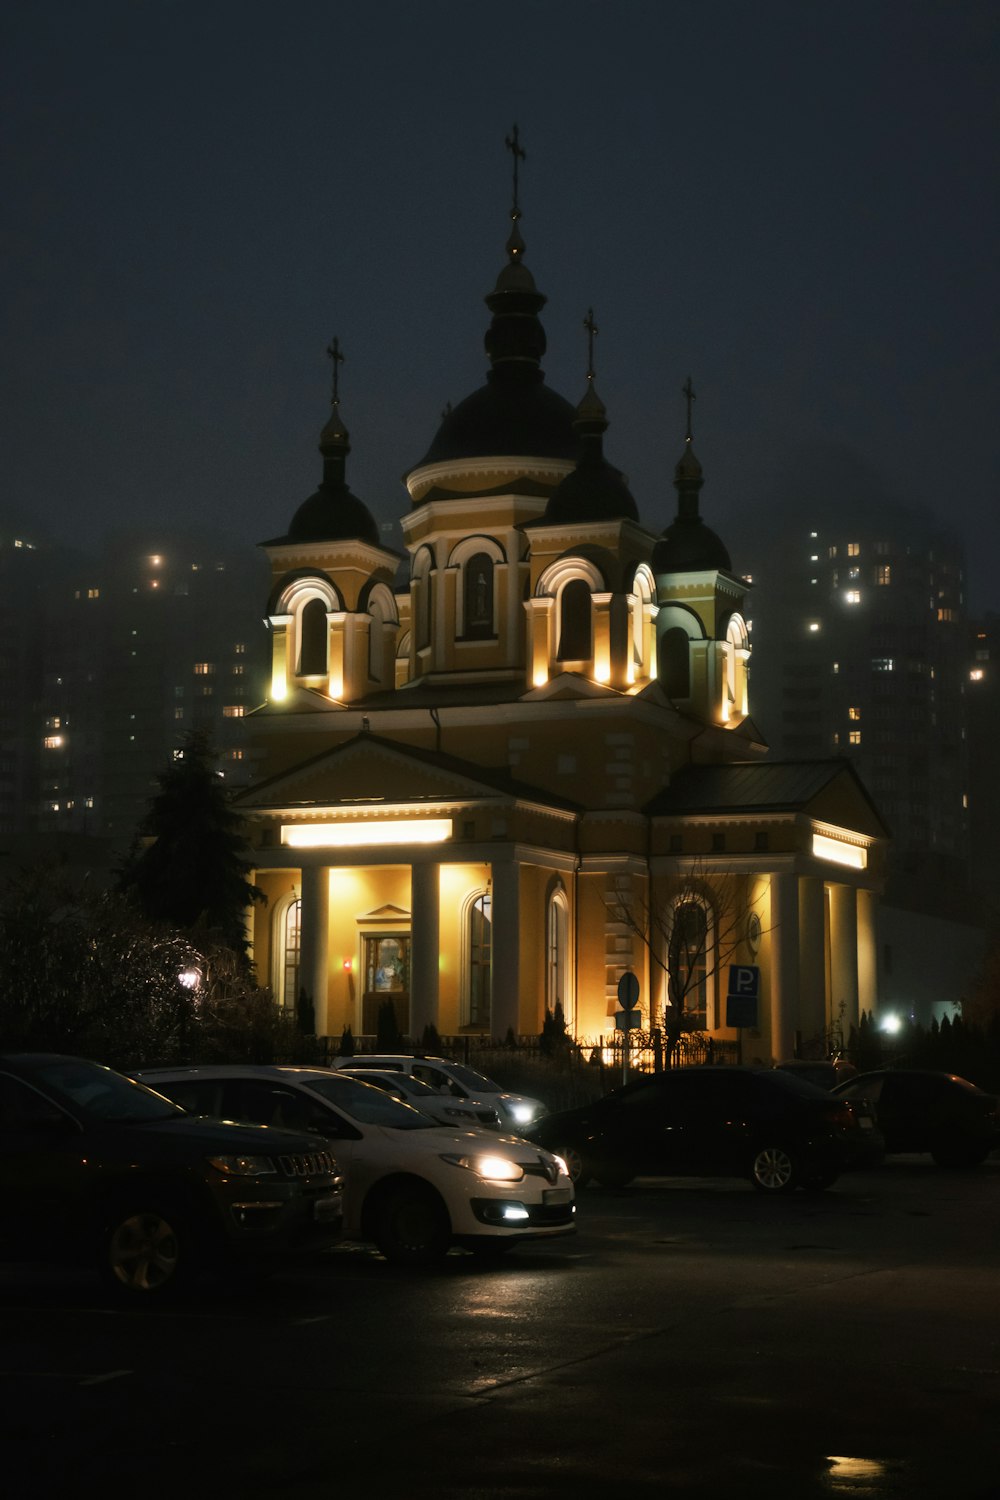 a church lit up at night with cars parked in front of it